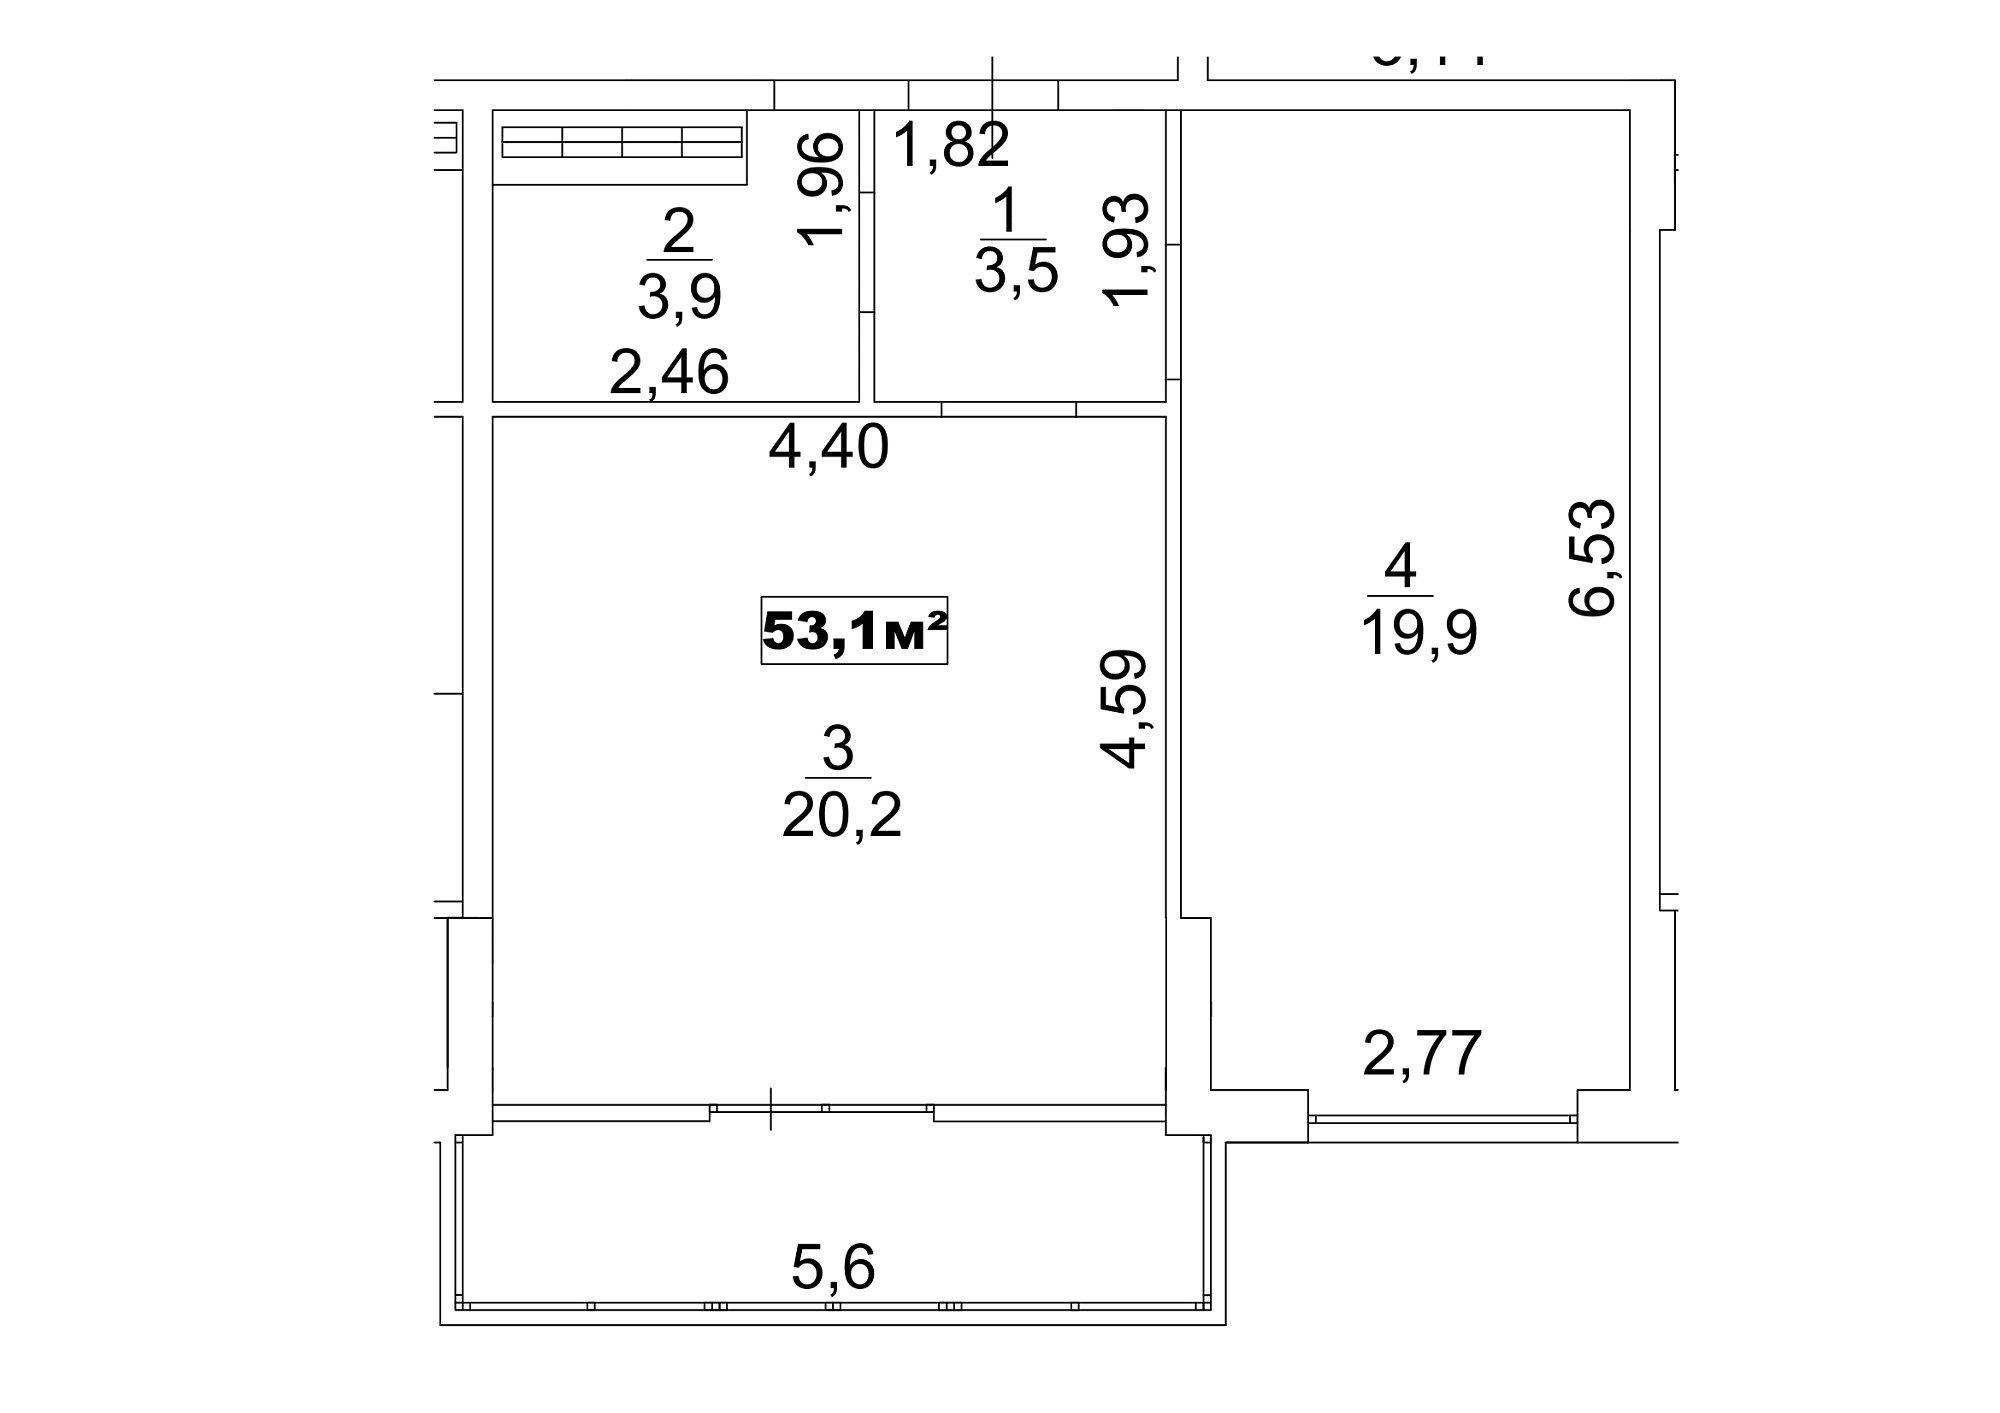 Planning 1-rm flats area 53.1m2, AB-13-10/00086.